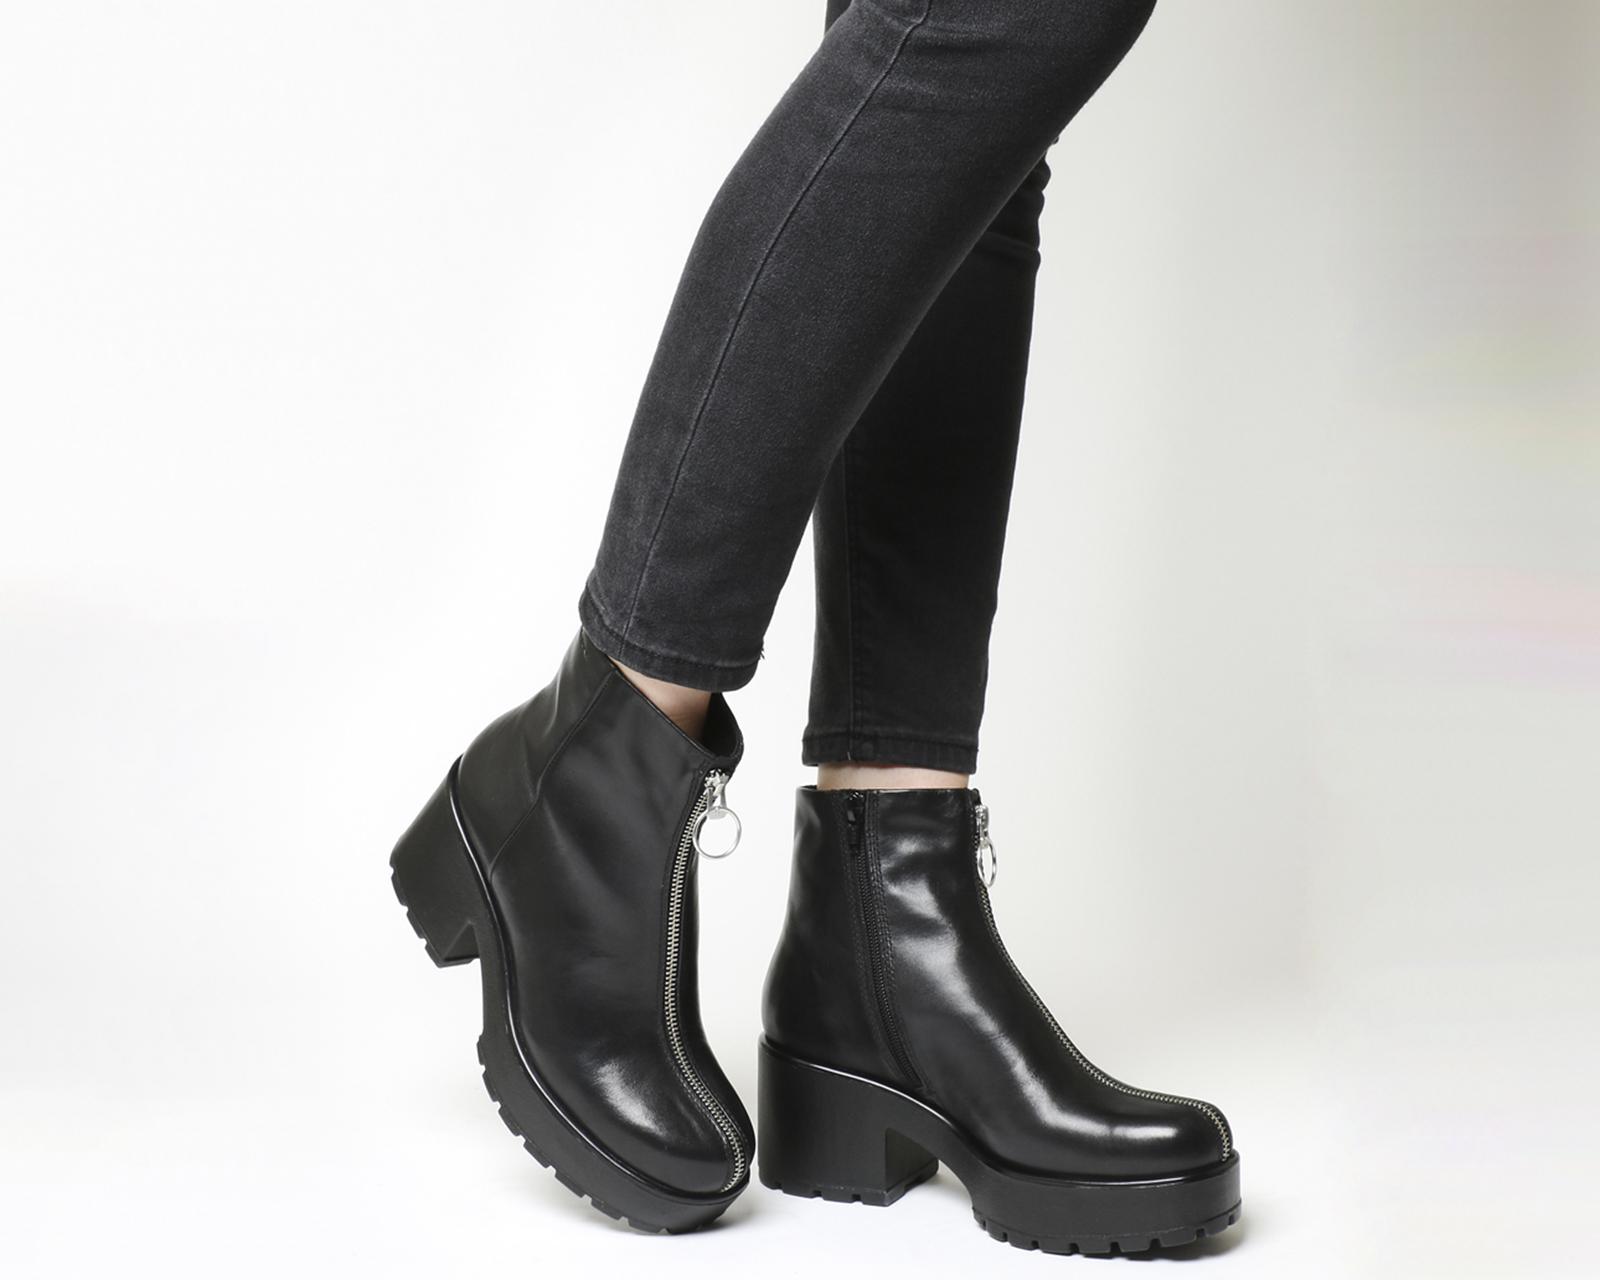 Outlook Samme malm Vagabond Leather Dioon Front Zip Boots in Black - Lyst